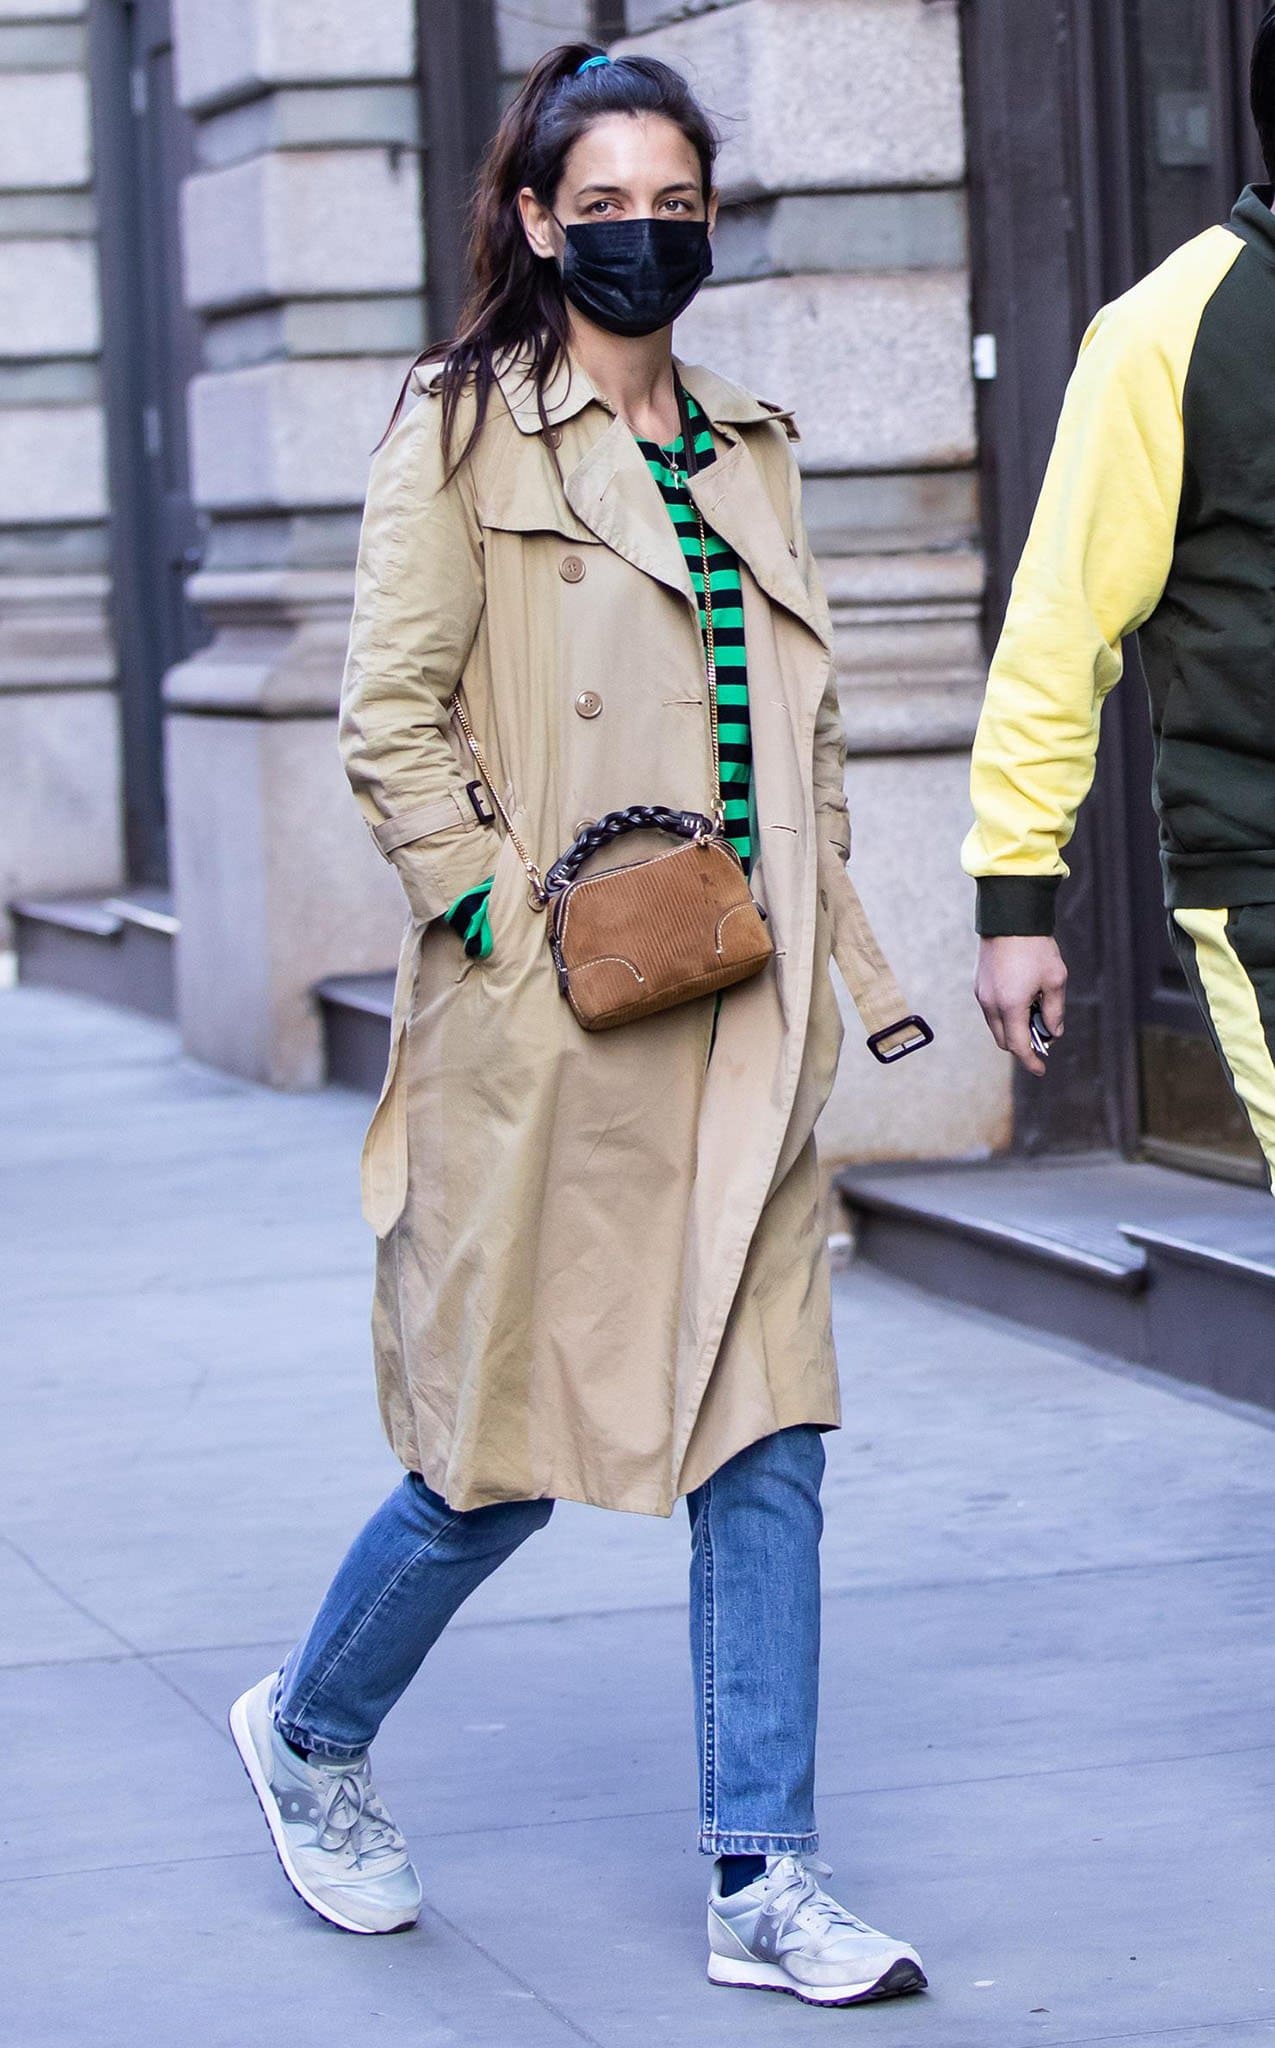 Katie Holmes steps out in a camel-colored coat with a black-and-green striped top and blue jeans